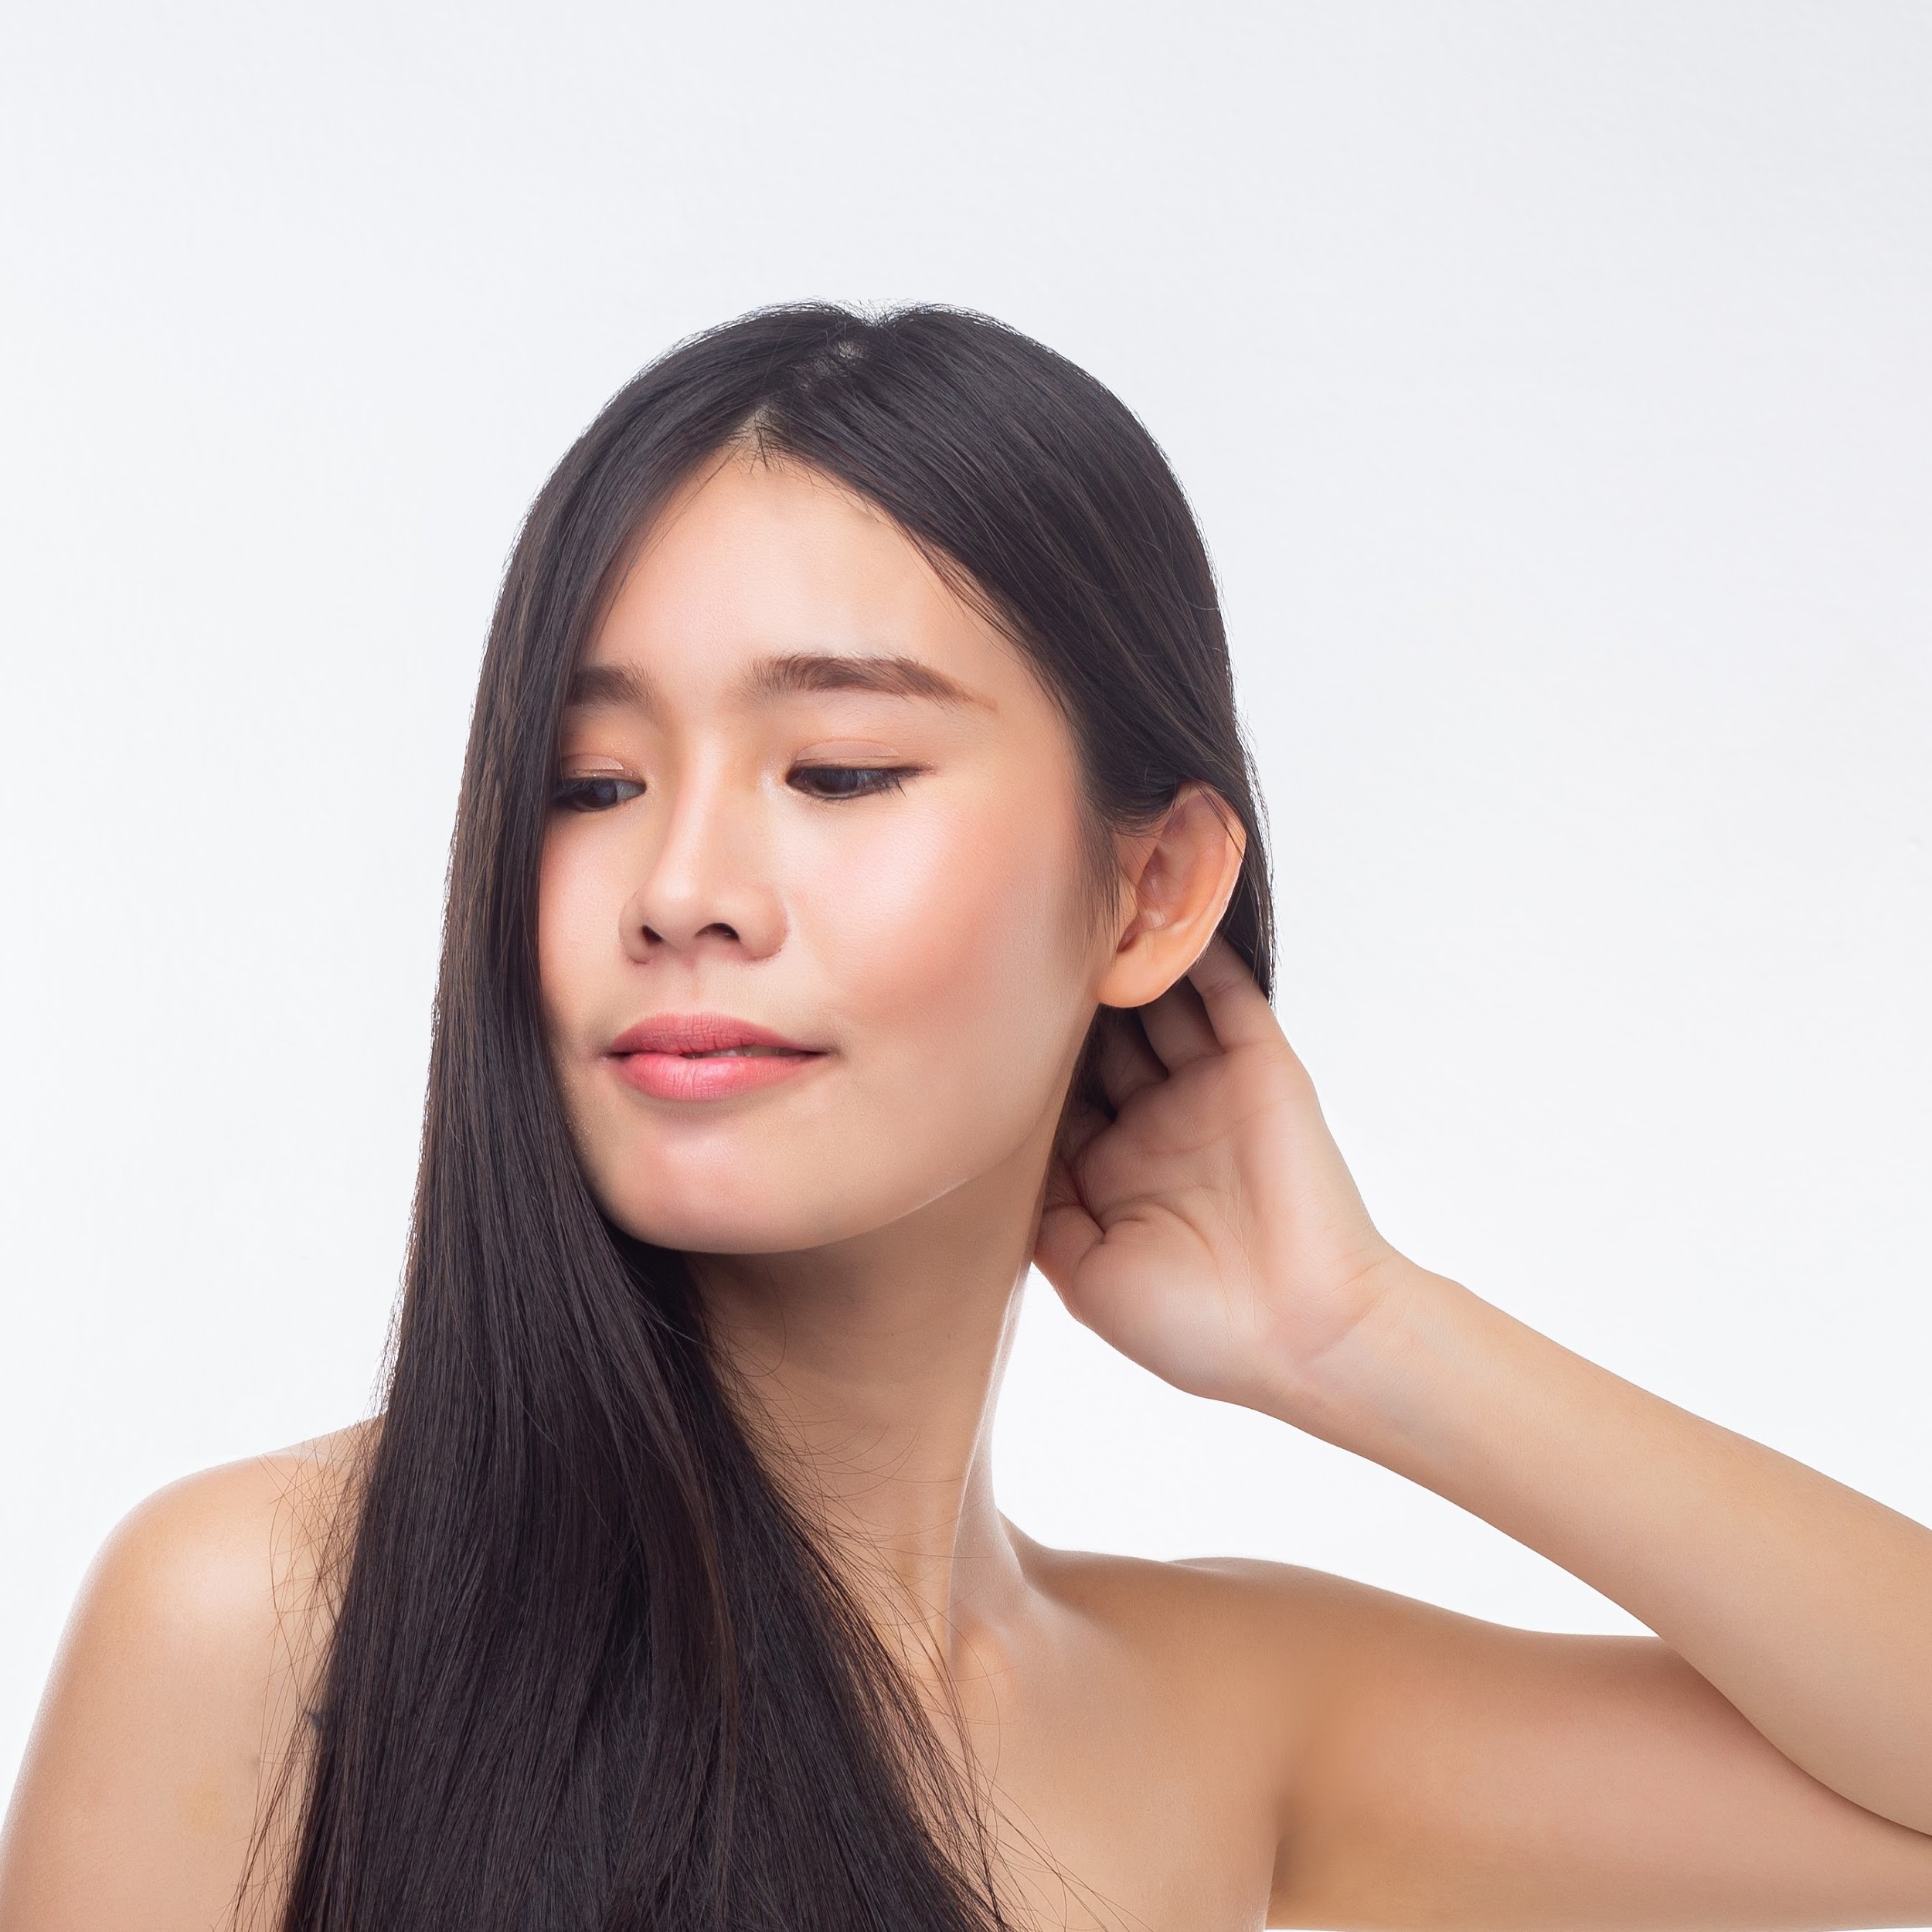 Hair-Smoothing Keratin Treatments: What You Need to Know